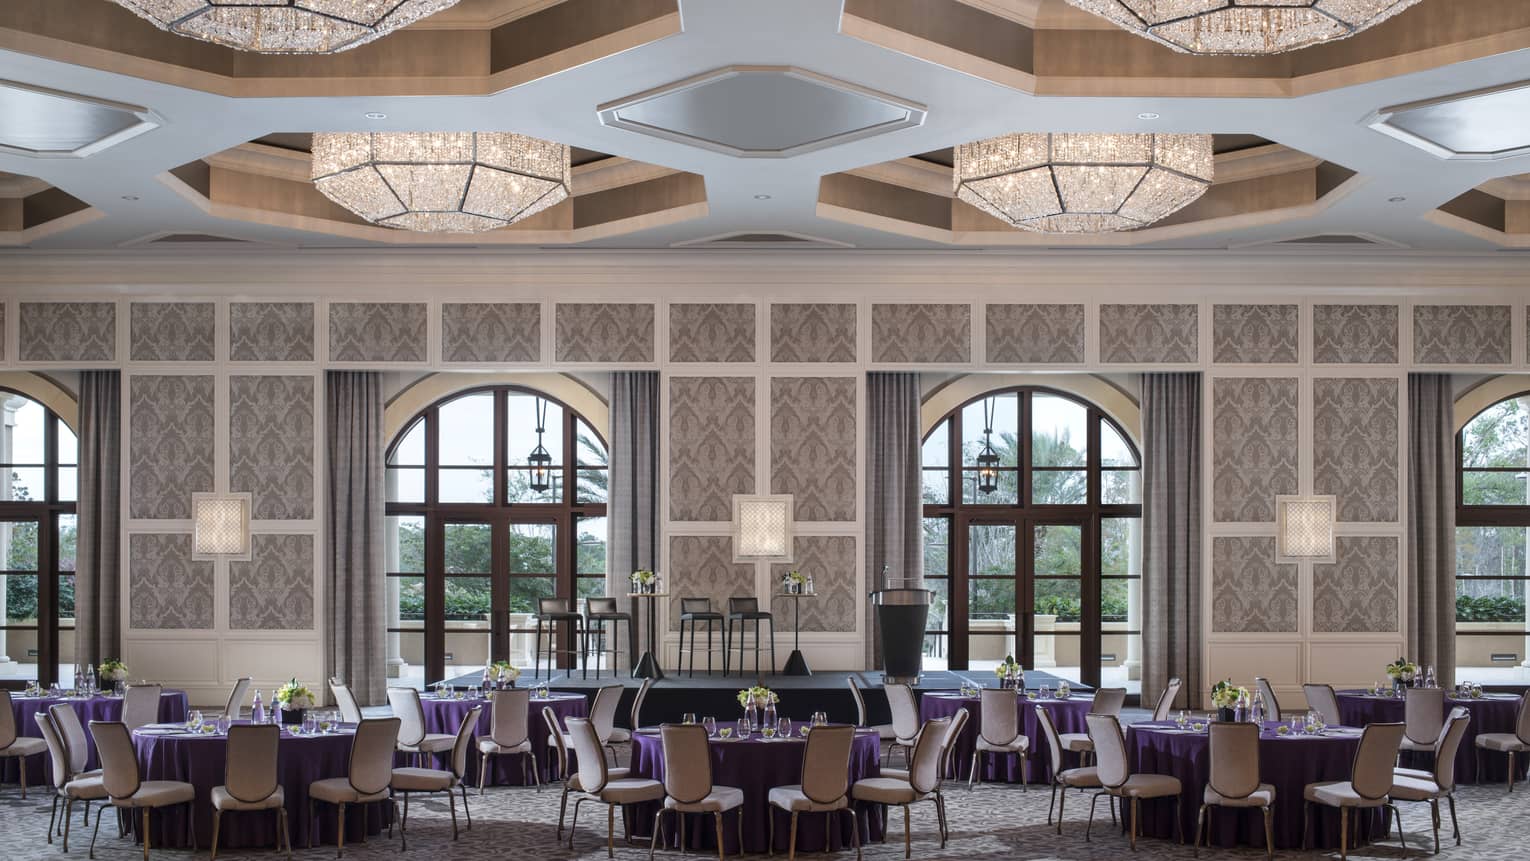 A ballroom at four seasons resort orlando at walt disney world is ready for guests with circular tables covered in purple table cloths